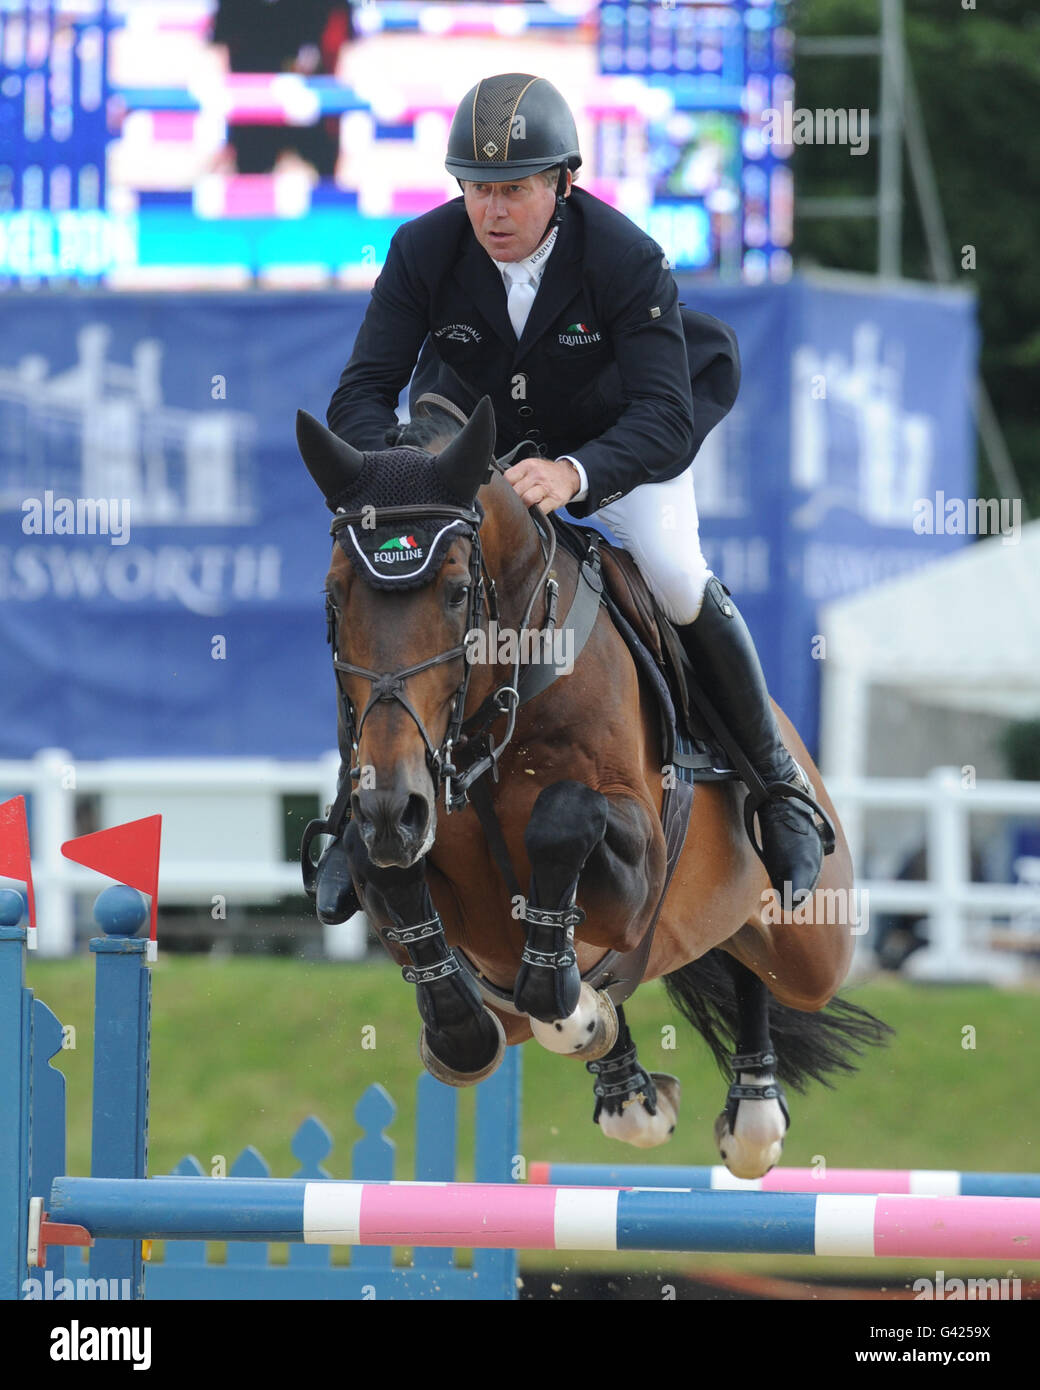 Bolesworth, UK. 17th June, 2016. Olympic gold medal duo Nick Skelton on Big Star competing at this weekends Bolesworth International Showjumping Show Credit:  Trevor Meeks/Alamy Live News Stock Photo